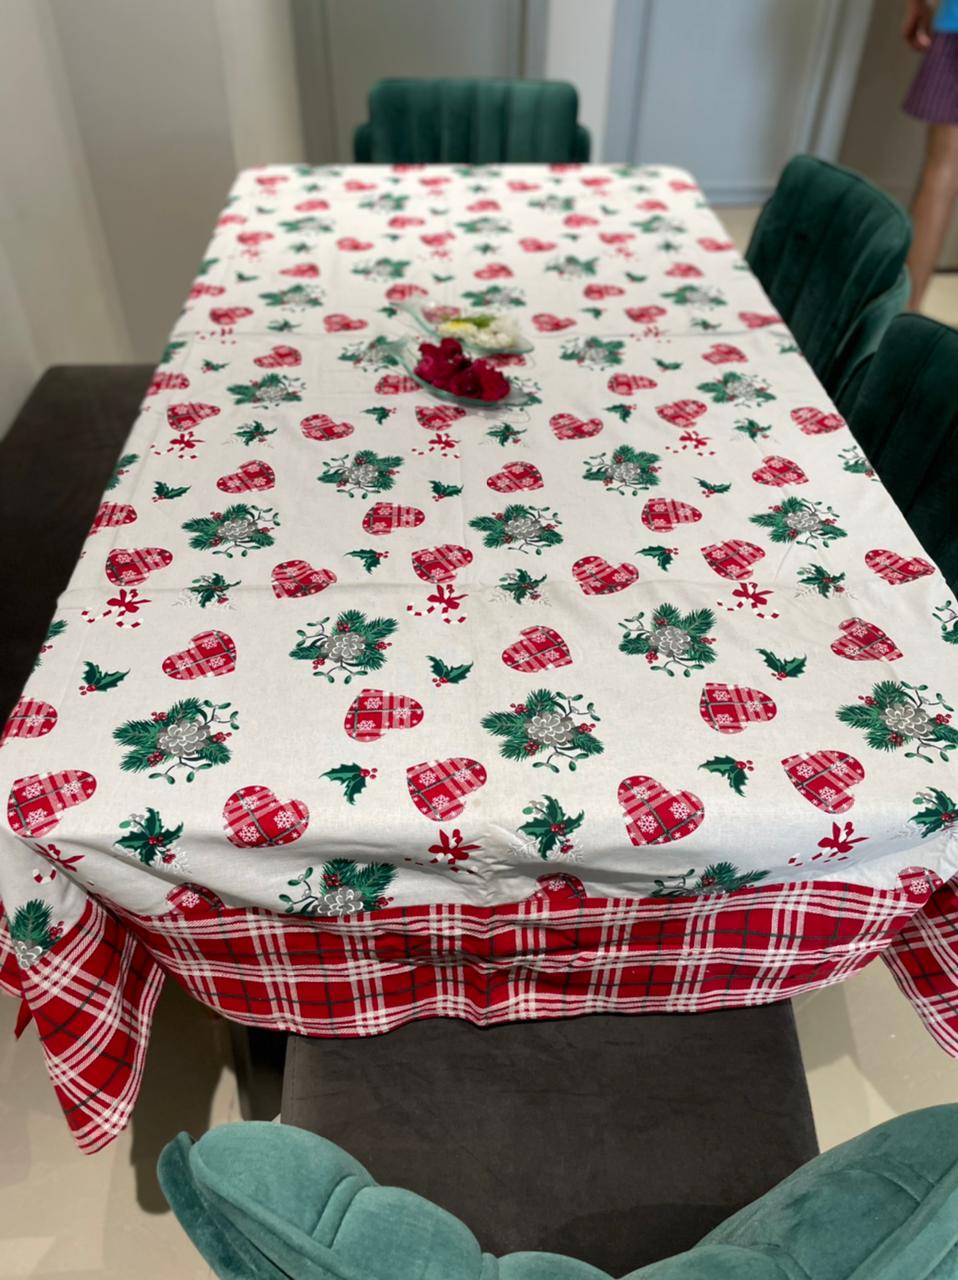 Heart Shape Pattern 100% cotton table cover size 54x84 inch